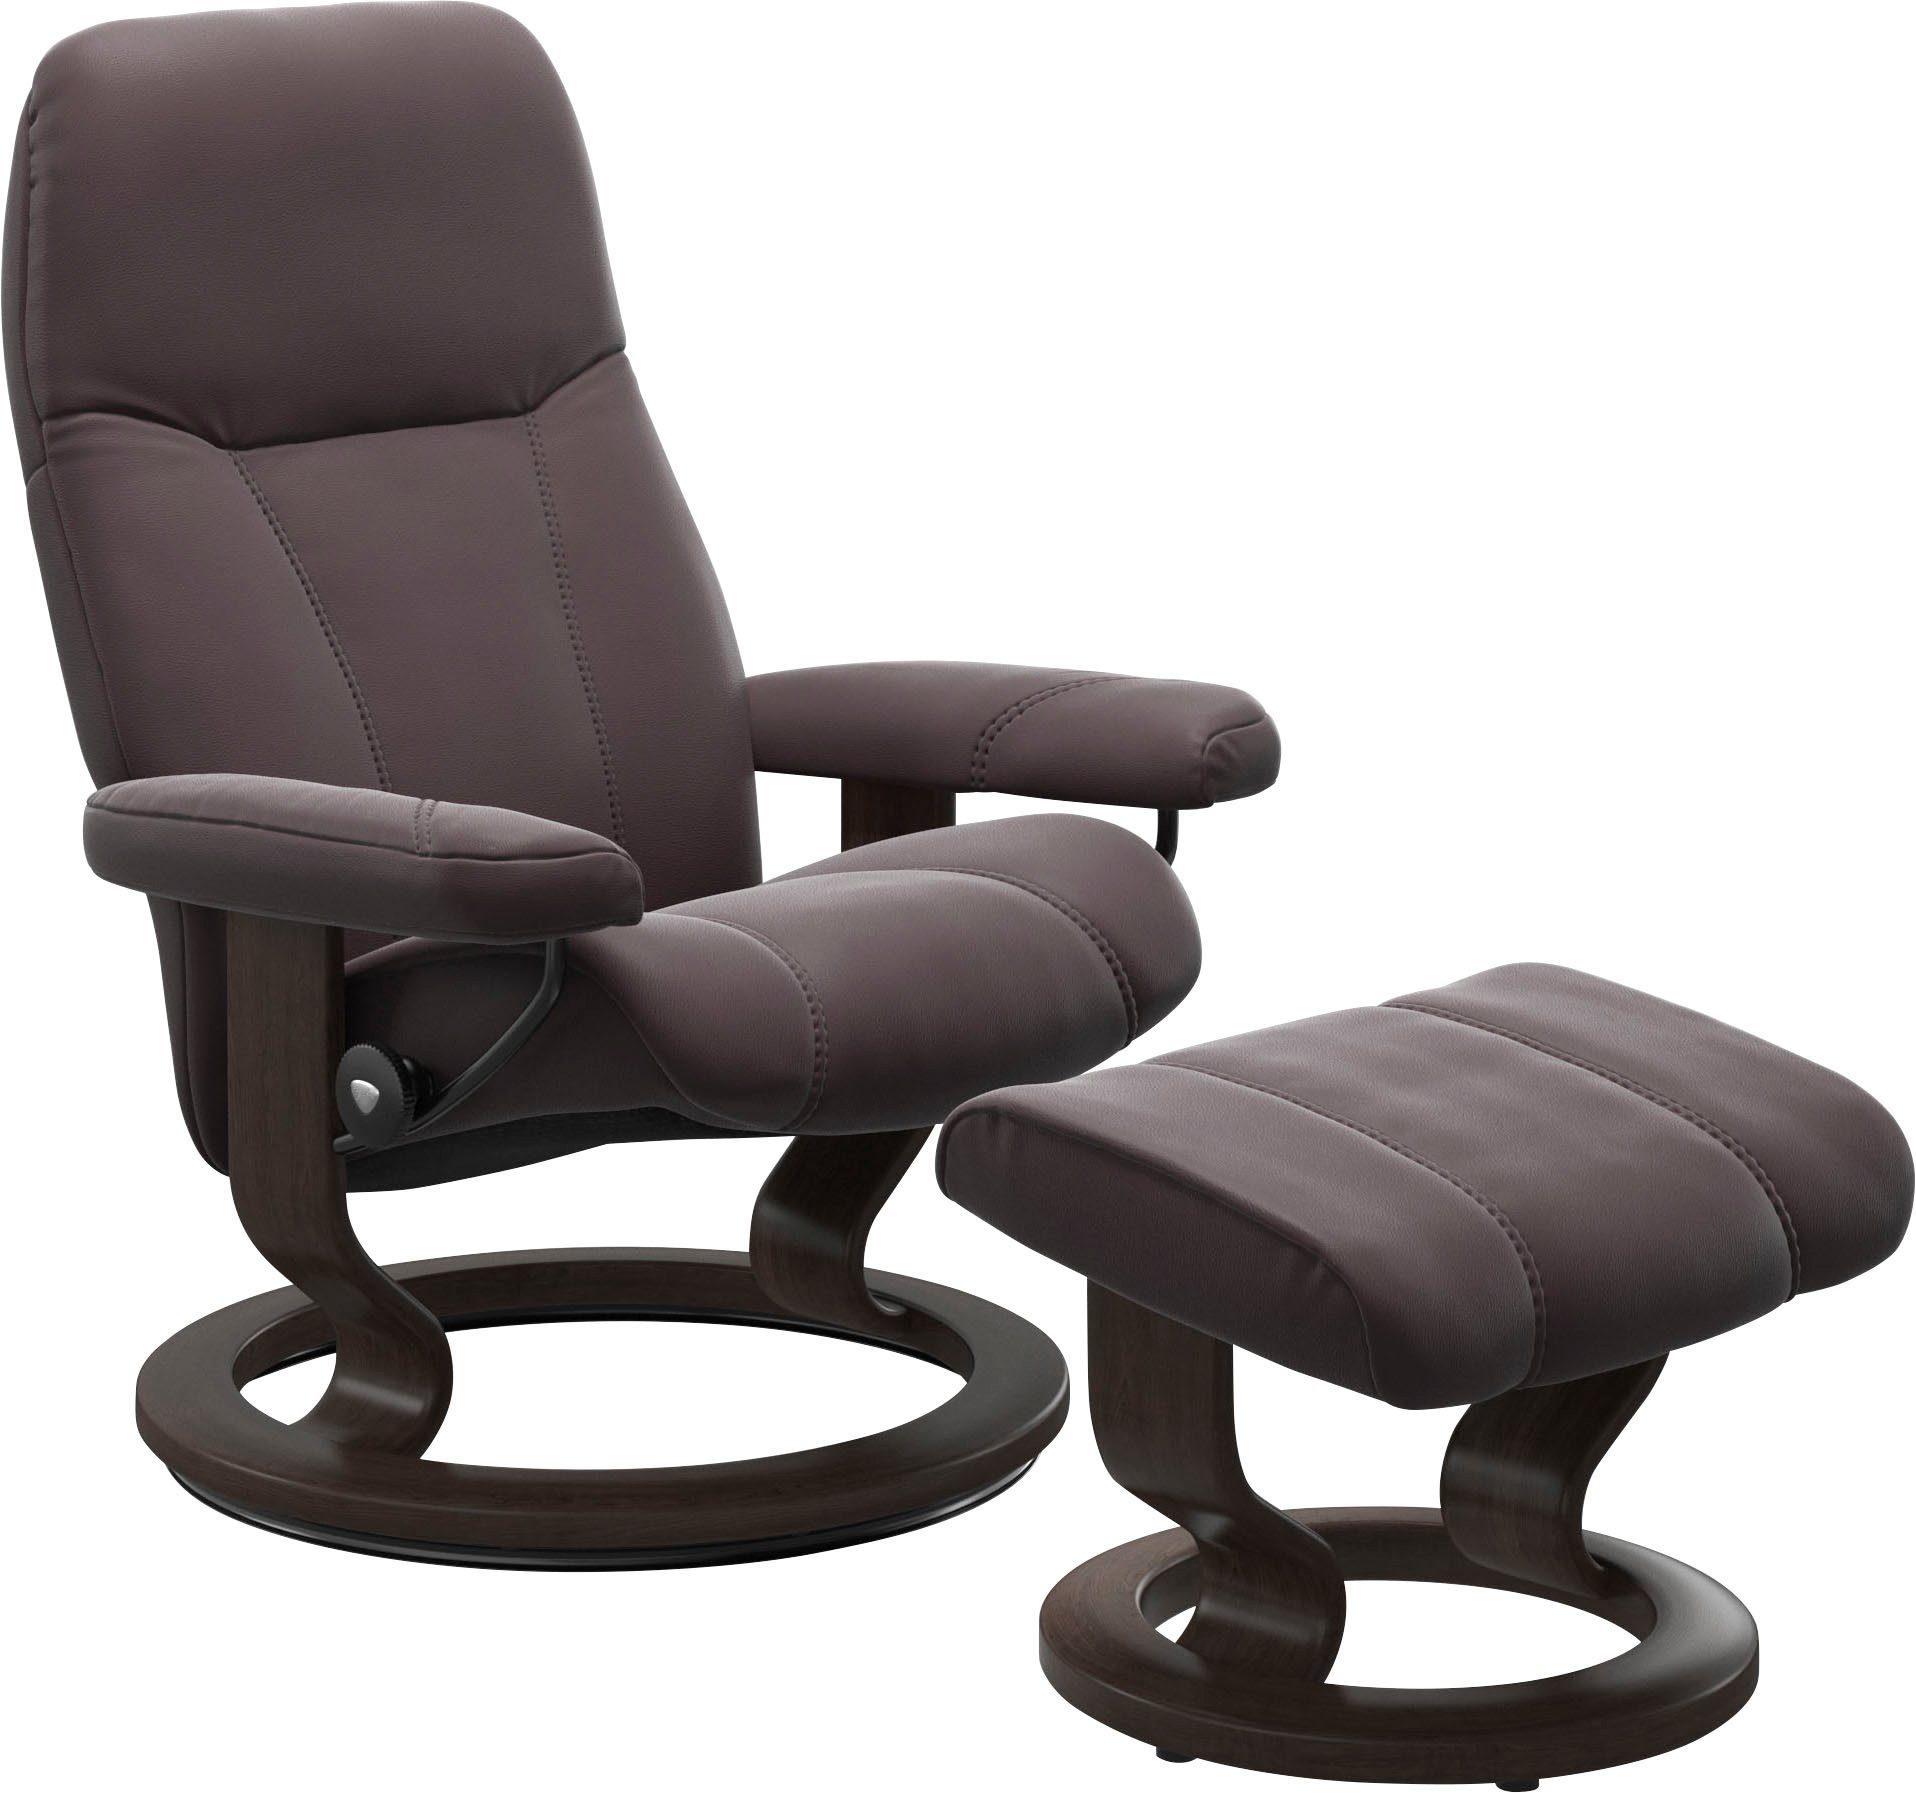 Wenge Größe M, Classic mit Gestell Consul, Stressless® Relaxsessel Base,